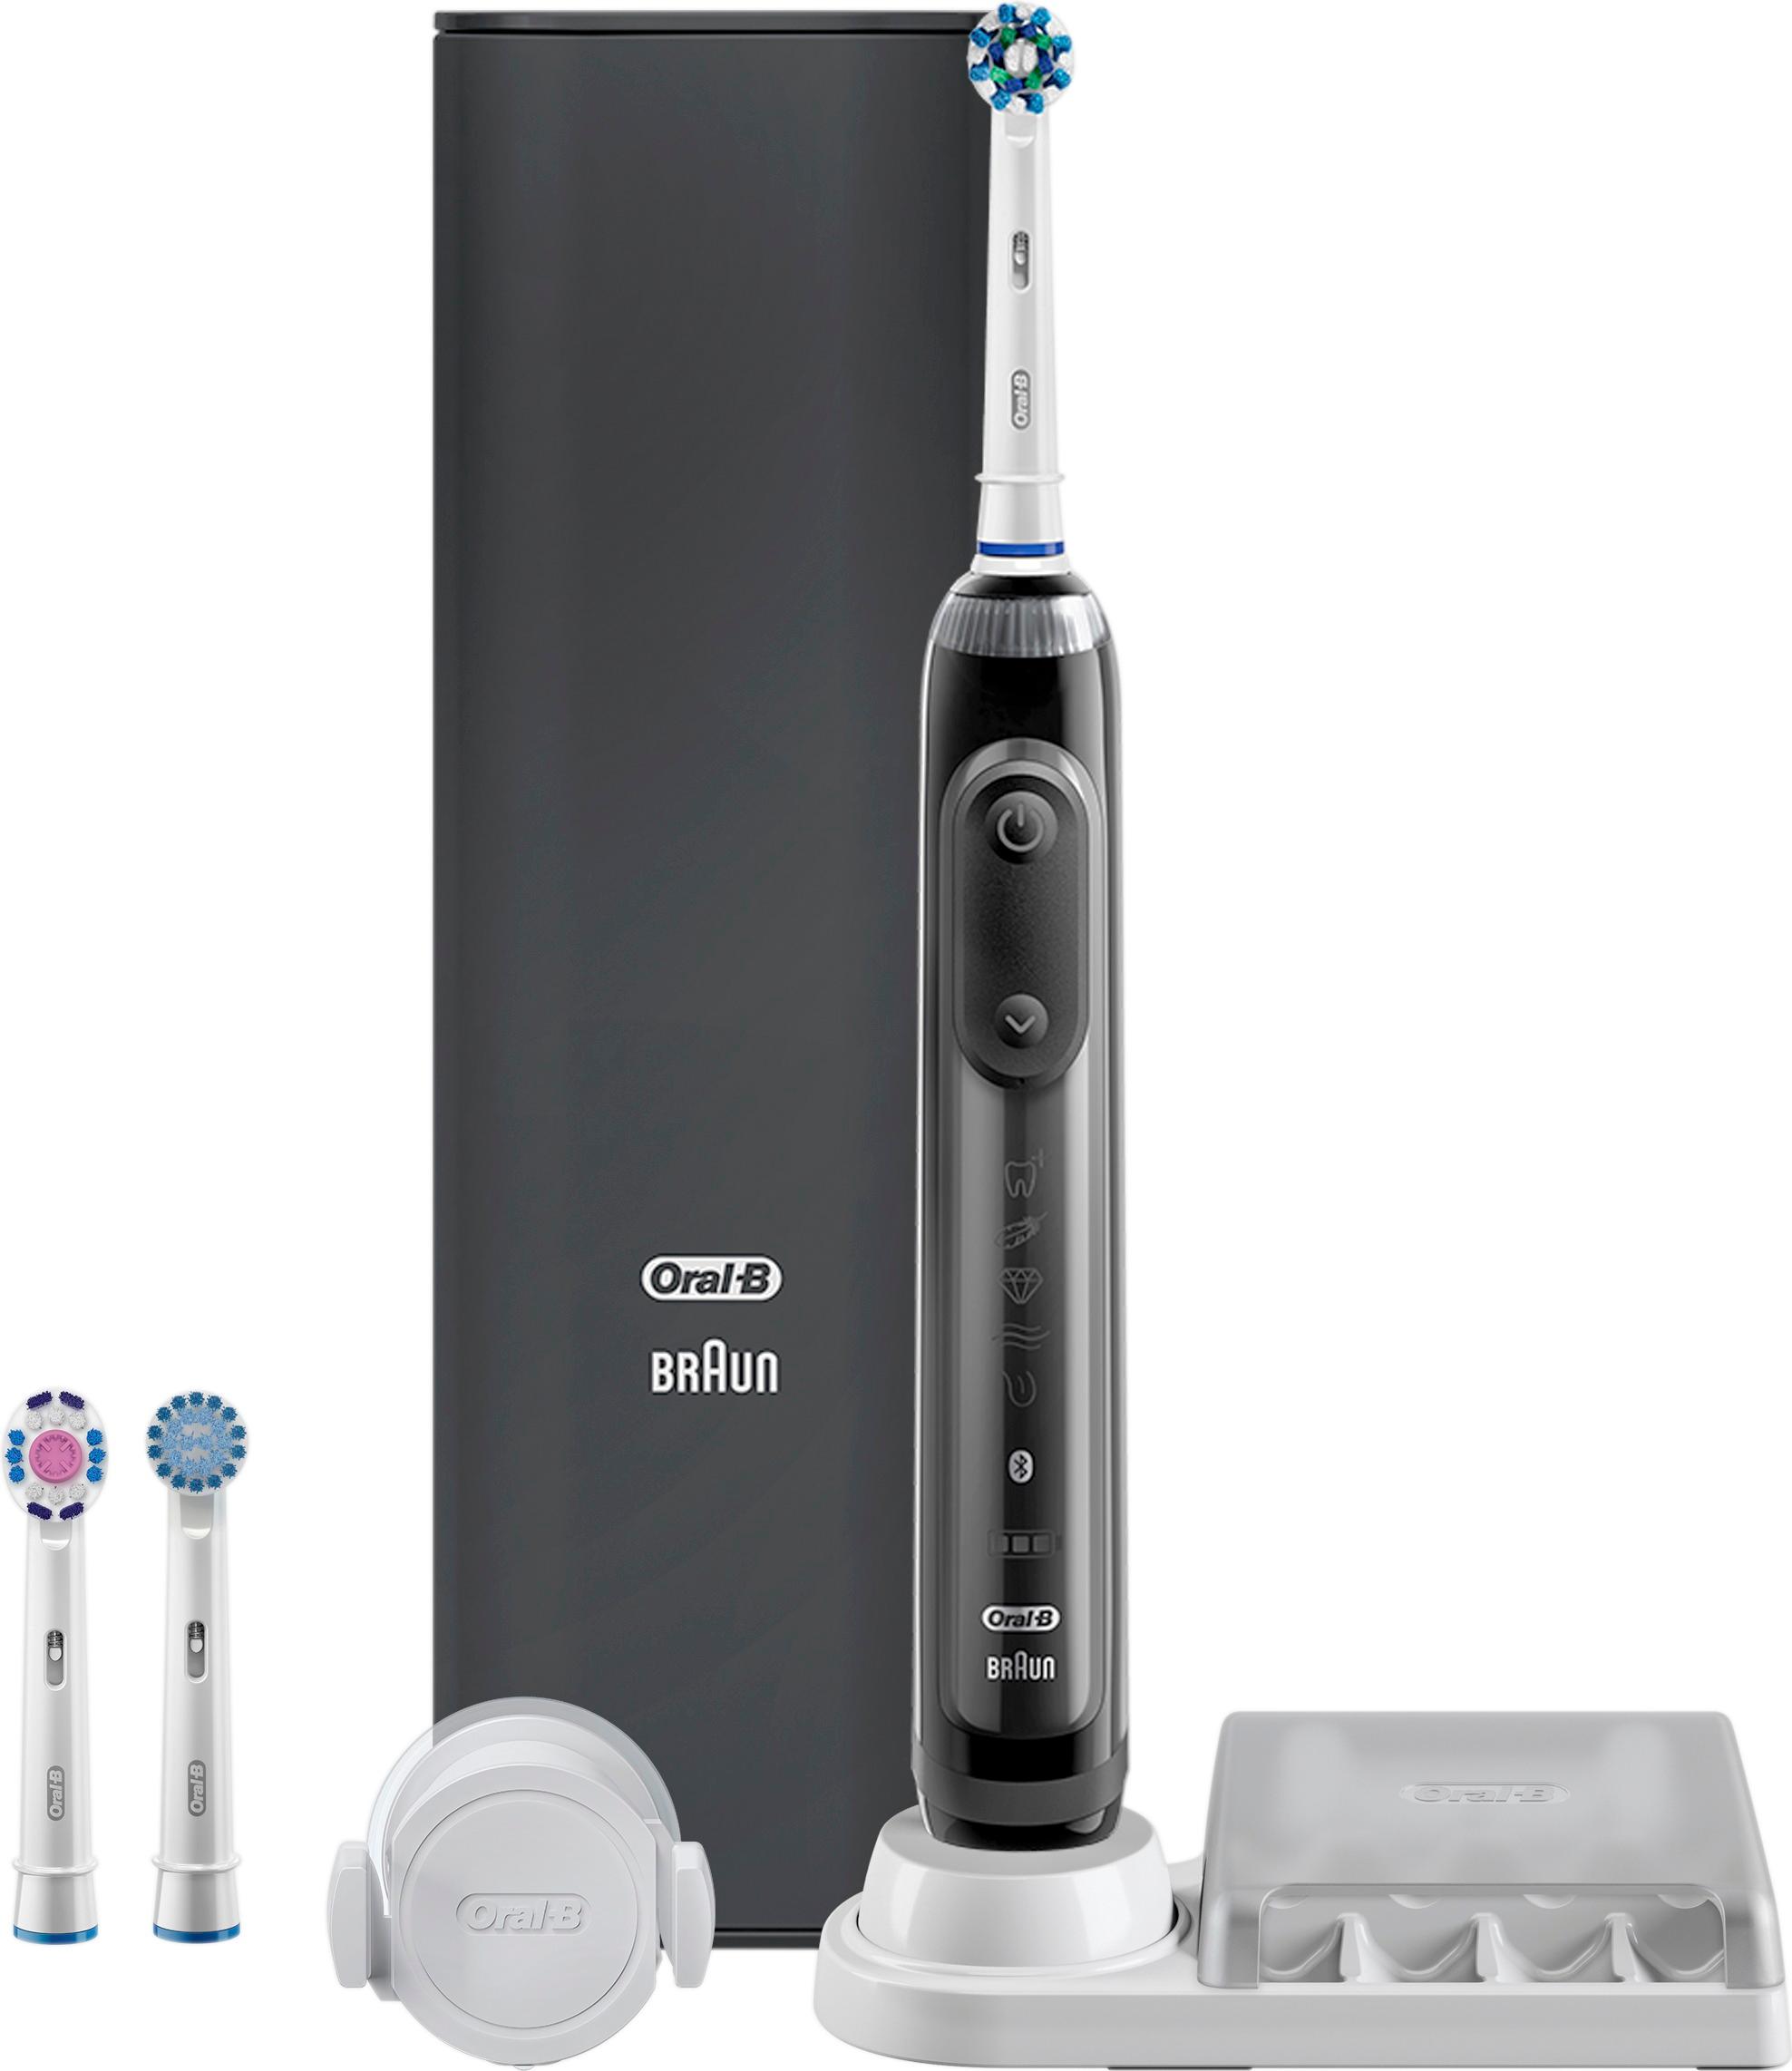 Angle View: Oral-B 8000 Electronic Toothbrush, Black, Powered by Braun - Black